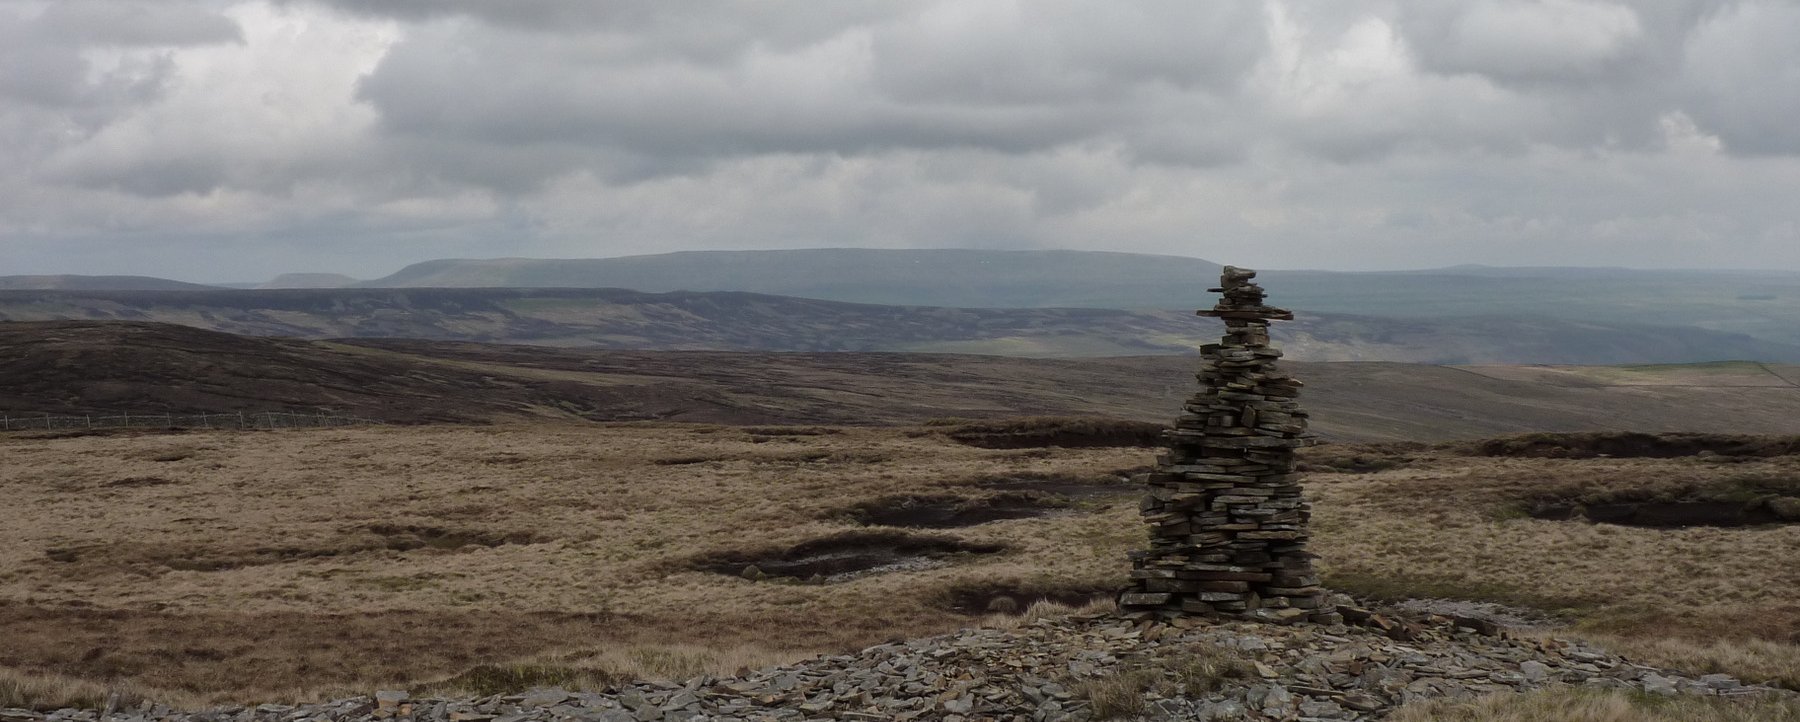 Cairn on the highpoint of the path over Fountains Fell